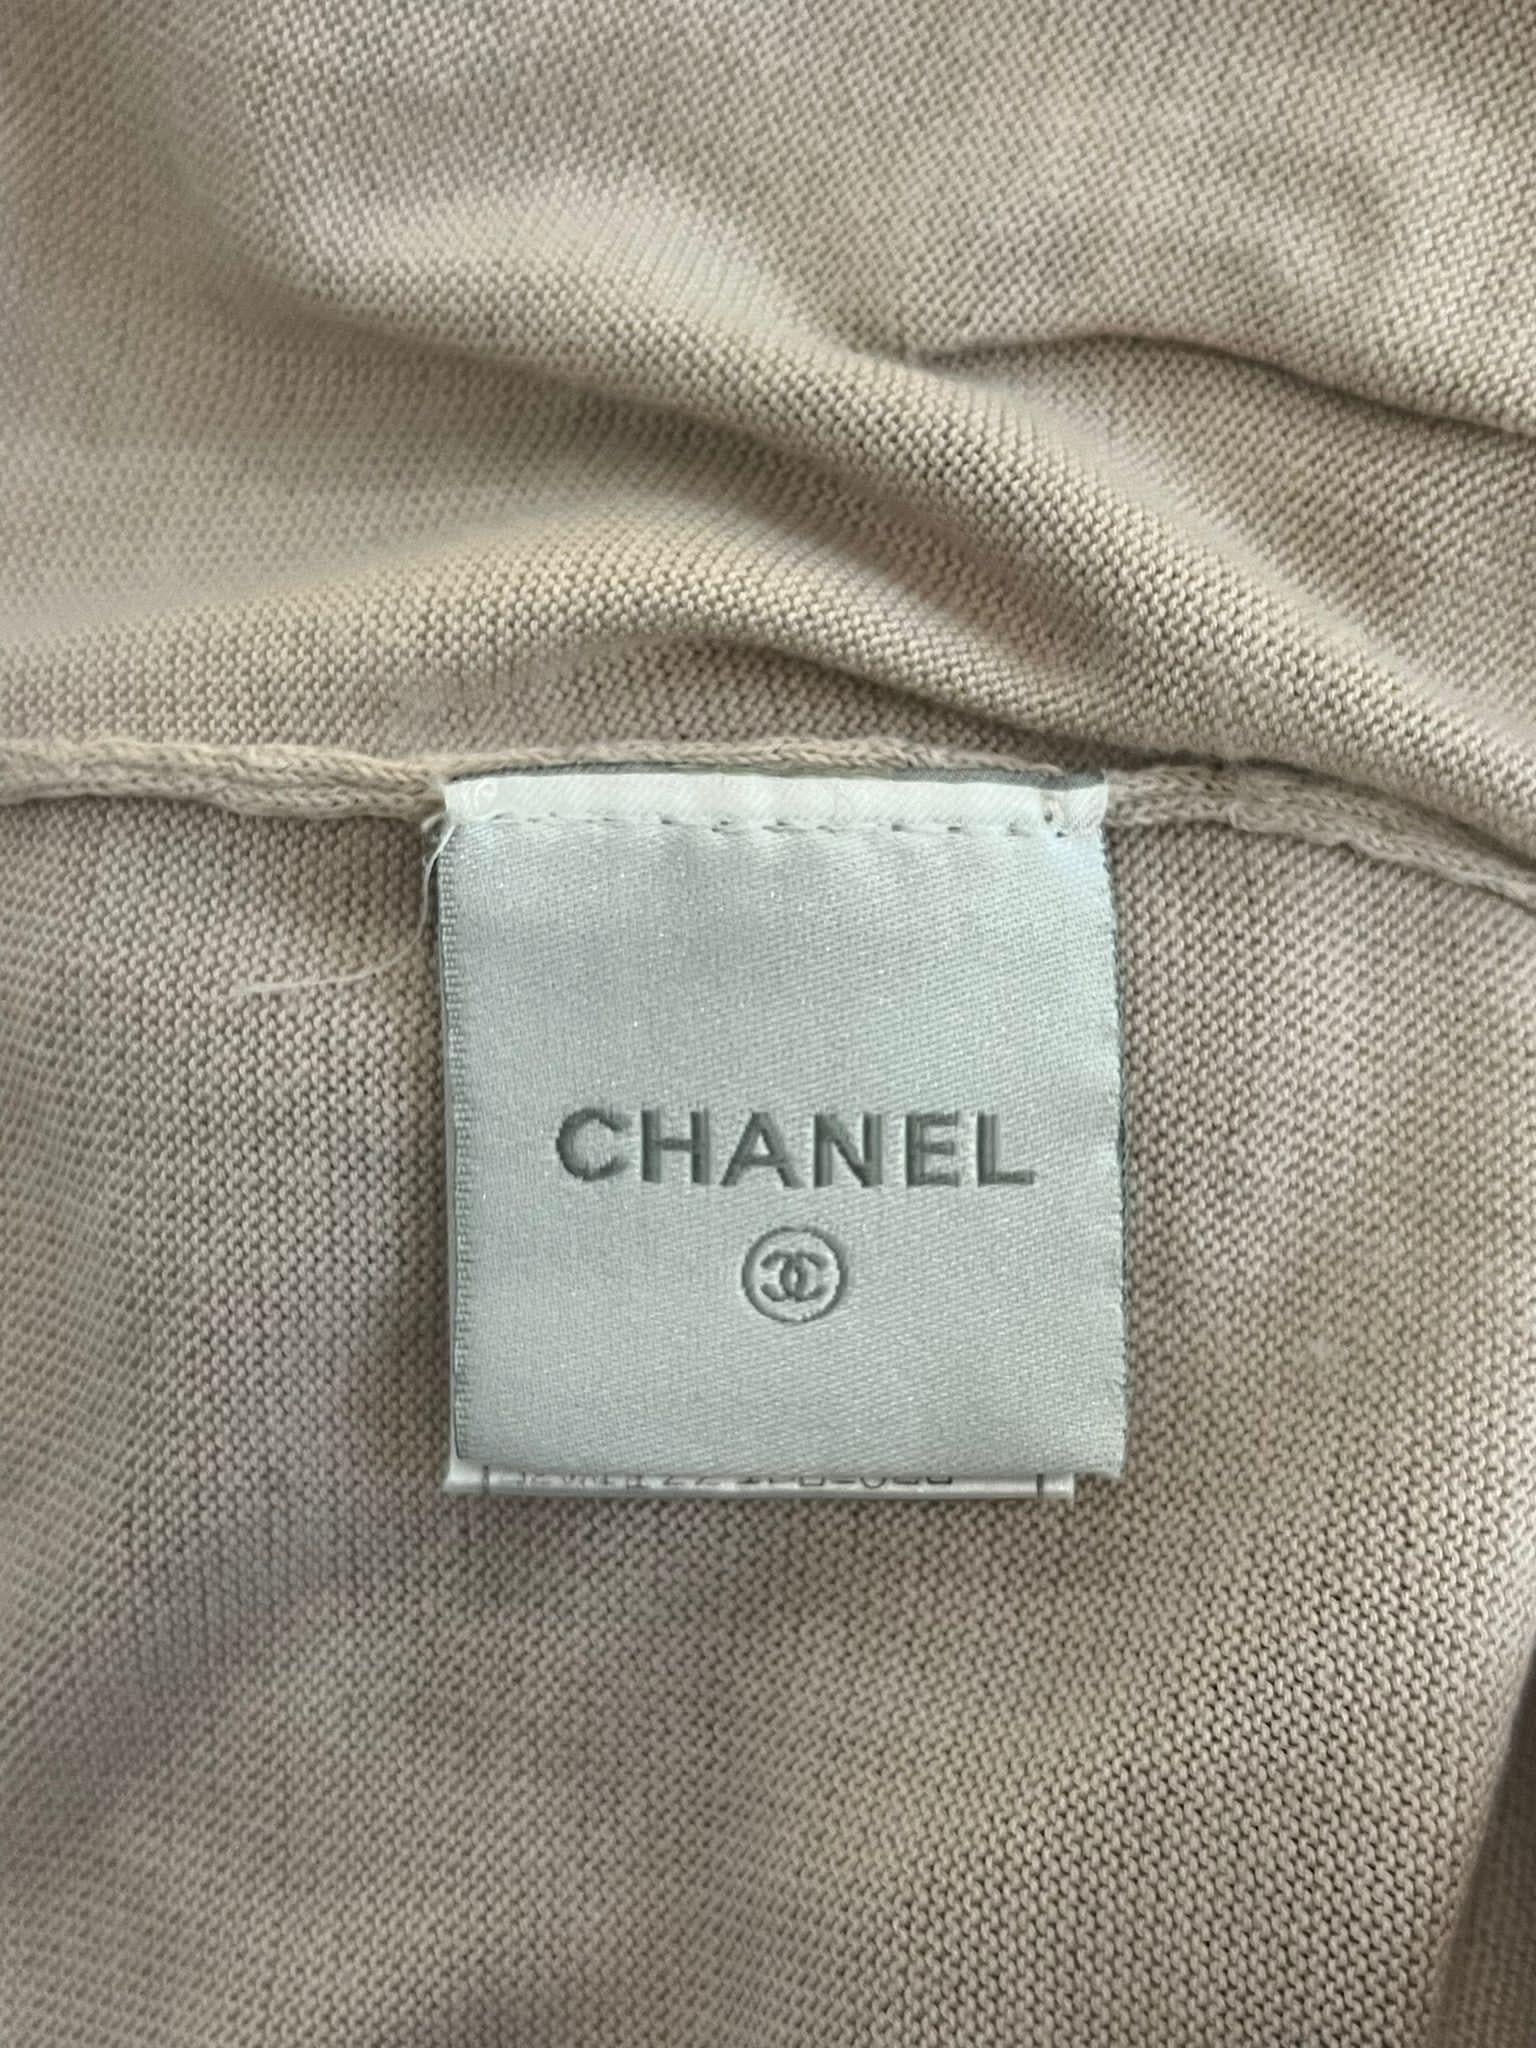 Chanel Cotton Top & Matching Hoodie For Sale 5